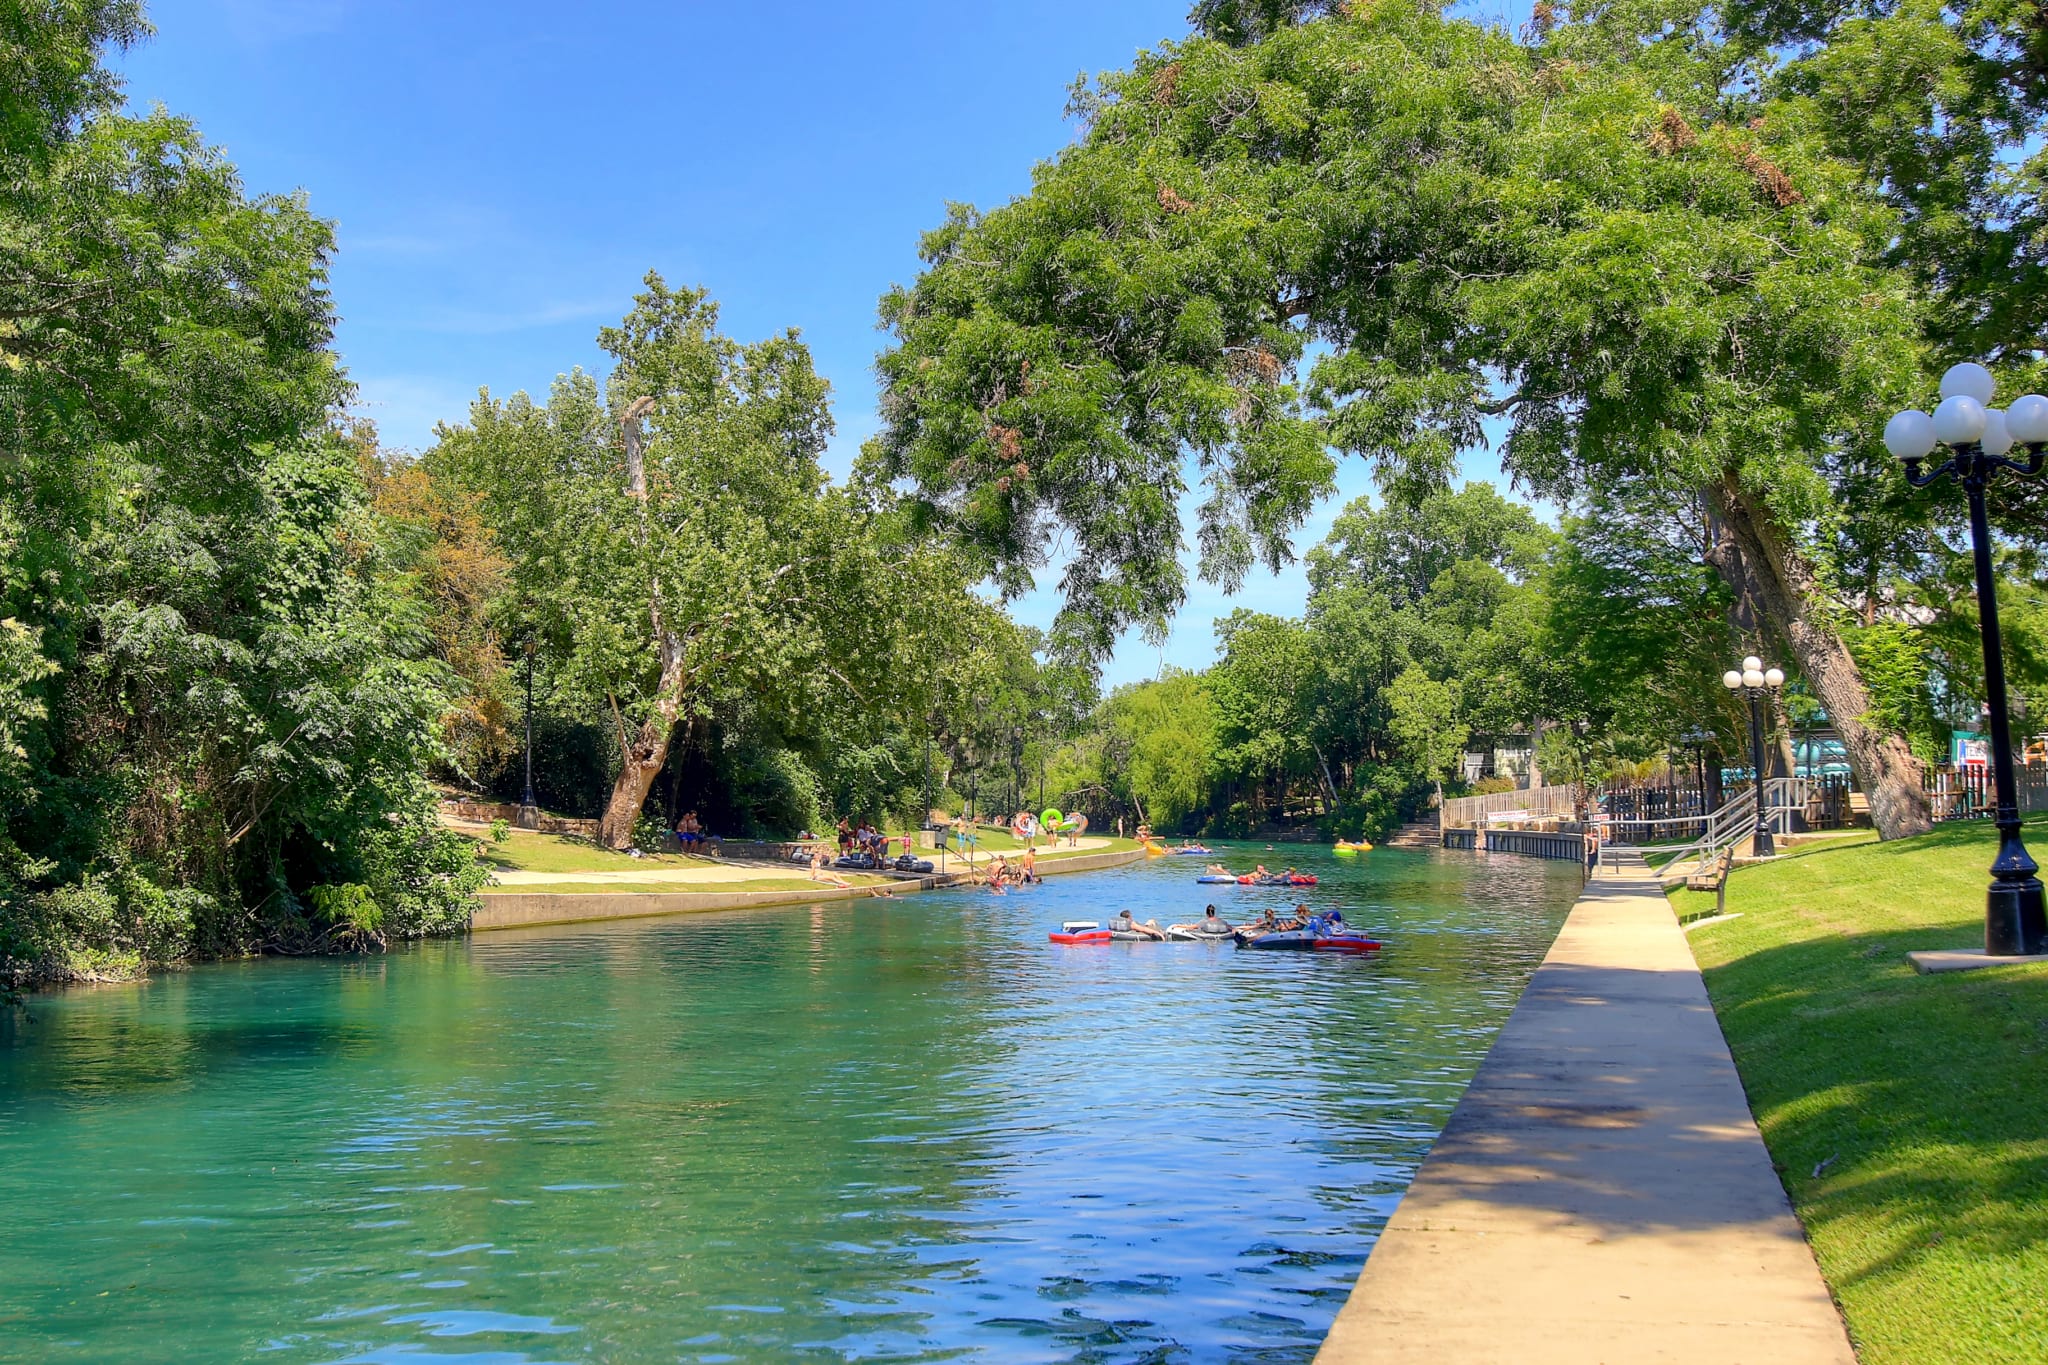 People floating on the Guadalupe River.